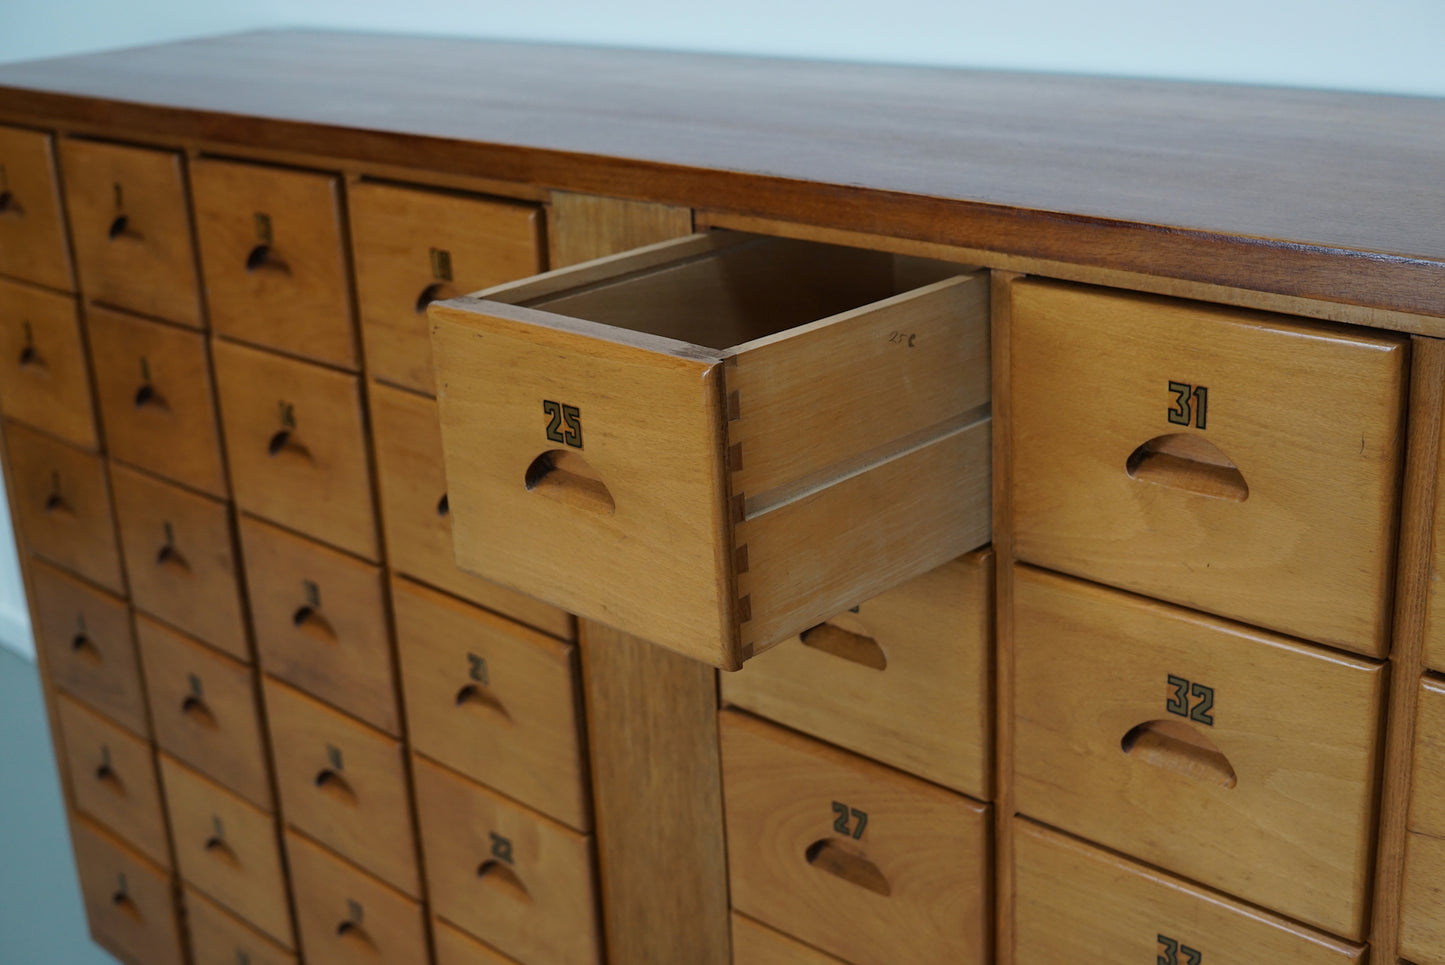 Dutch Industrial Beech Apothecary / School Cabinet, Mid-20th Century